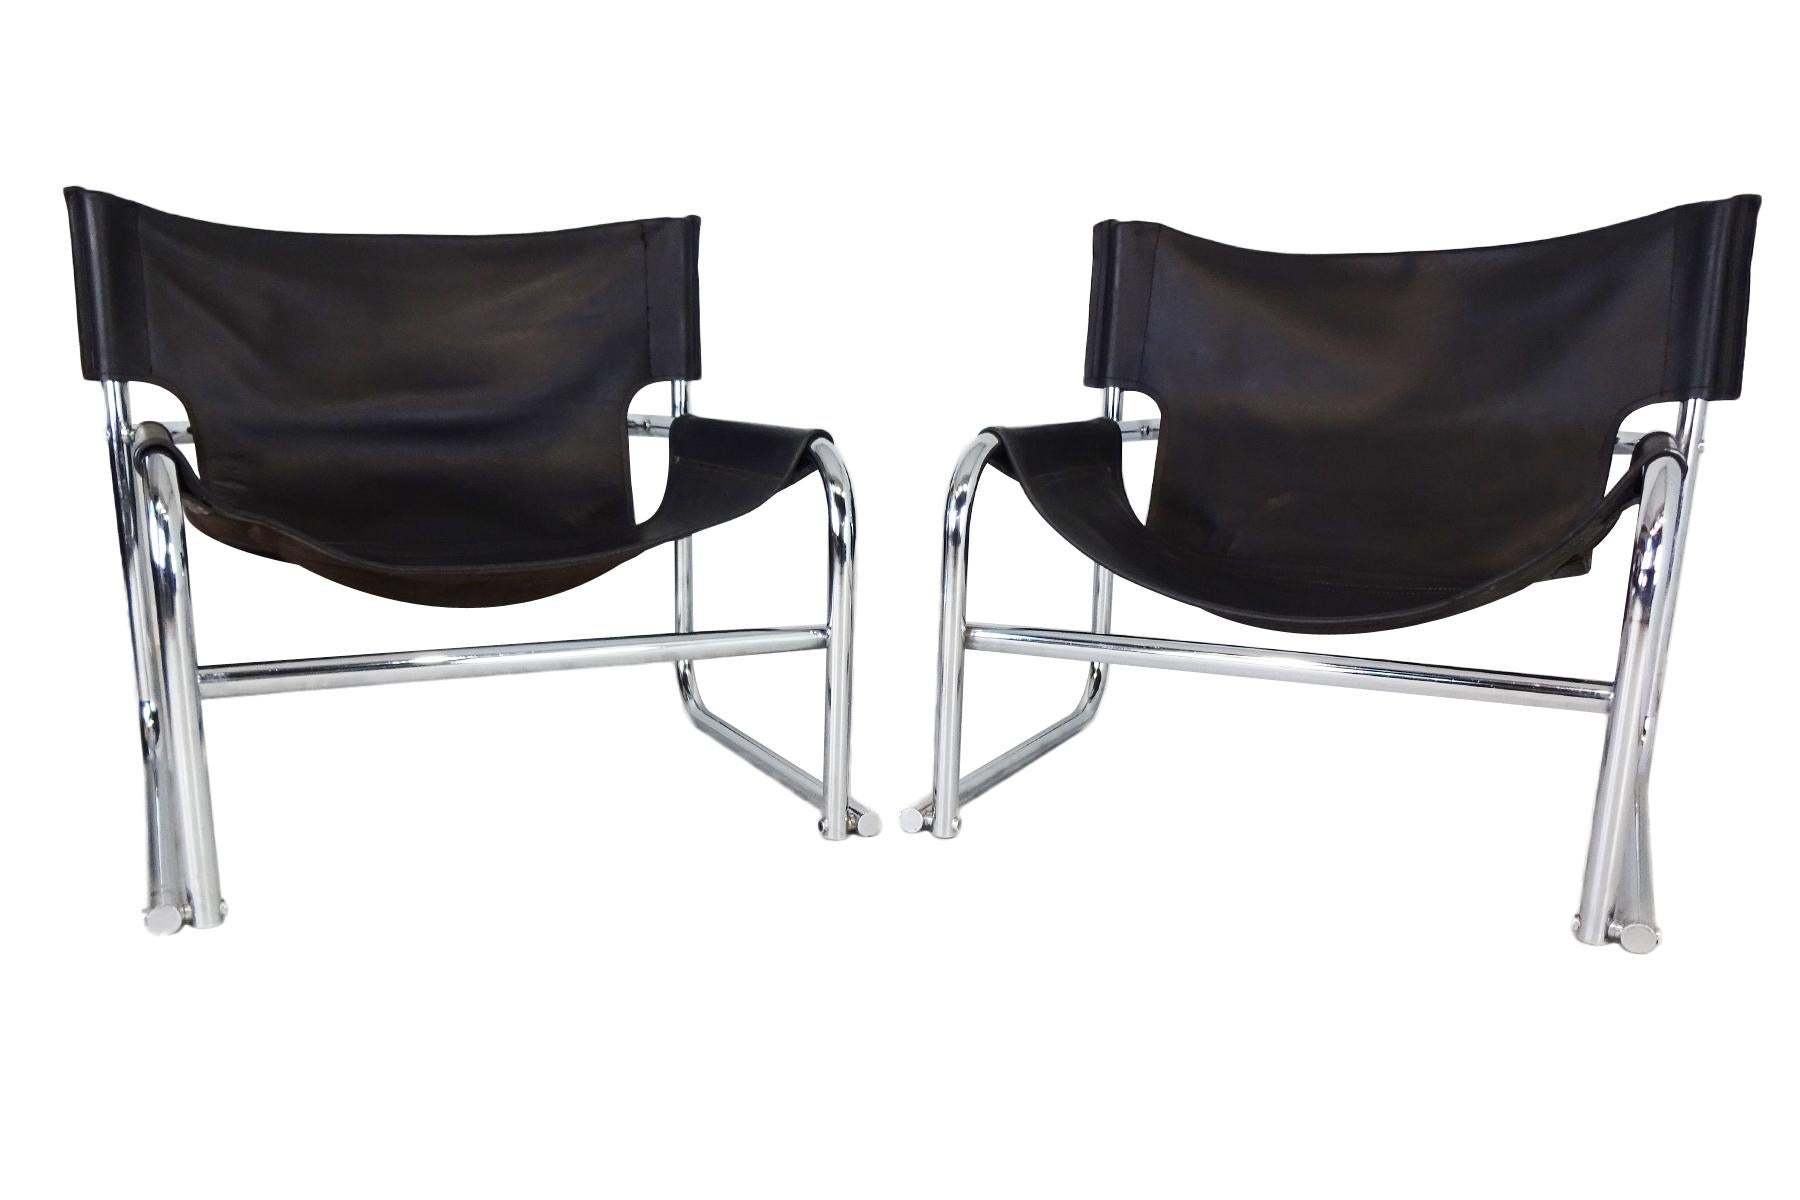 Vintage late midcentury black leather T1 sling lounge chairs by Rodney Kinsman for OMK.

Kinsman trained at the Central School of Art and in 1966 founded OMK furniture with partners Jurek Olejnik and Bryan Morrison in 1966, the company name being